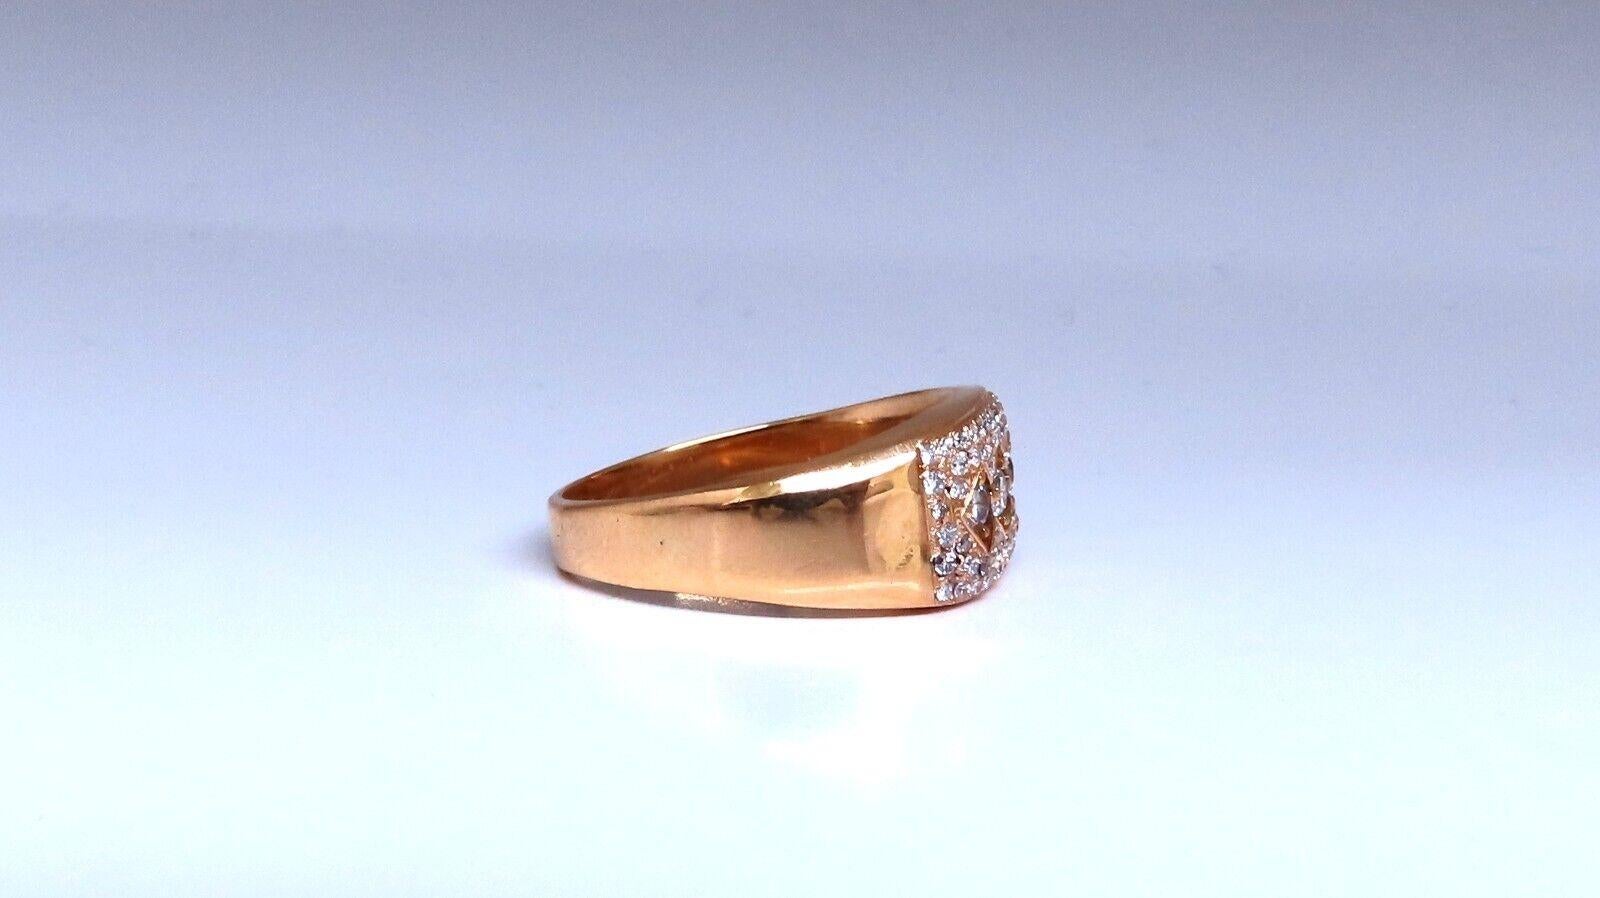 .60ct Natural Round Cut Diamond unisex mens Ring

Si-1 clarity H color.

14kt yellow gold

6.4 Grams

Depth: 9mm

Current ring size: 10.25

May professionally resize, please inquire.

